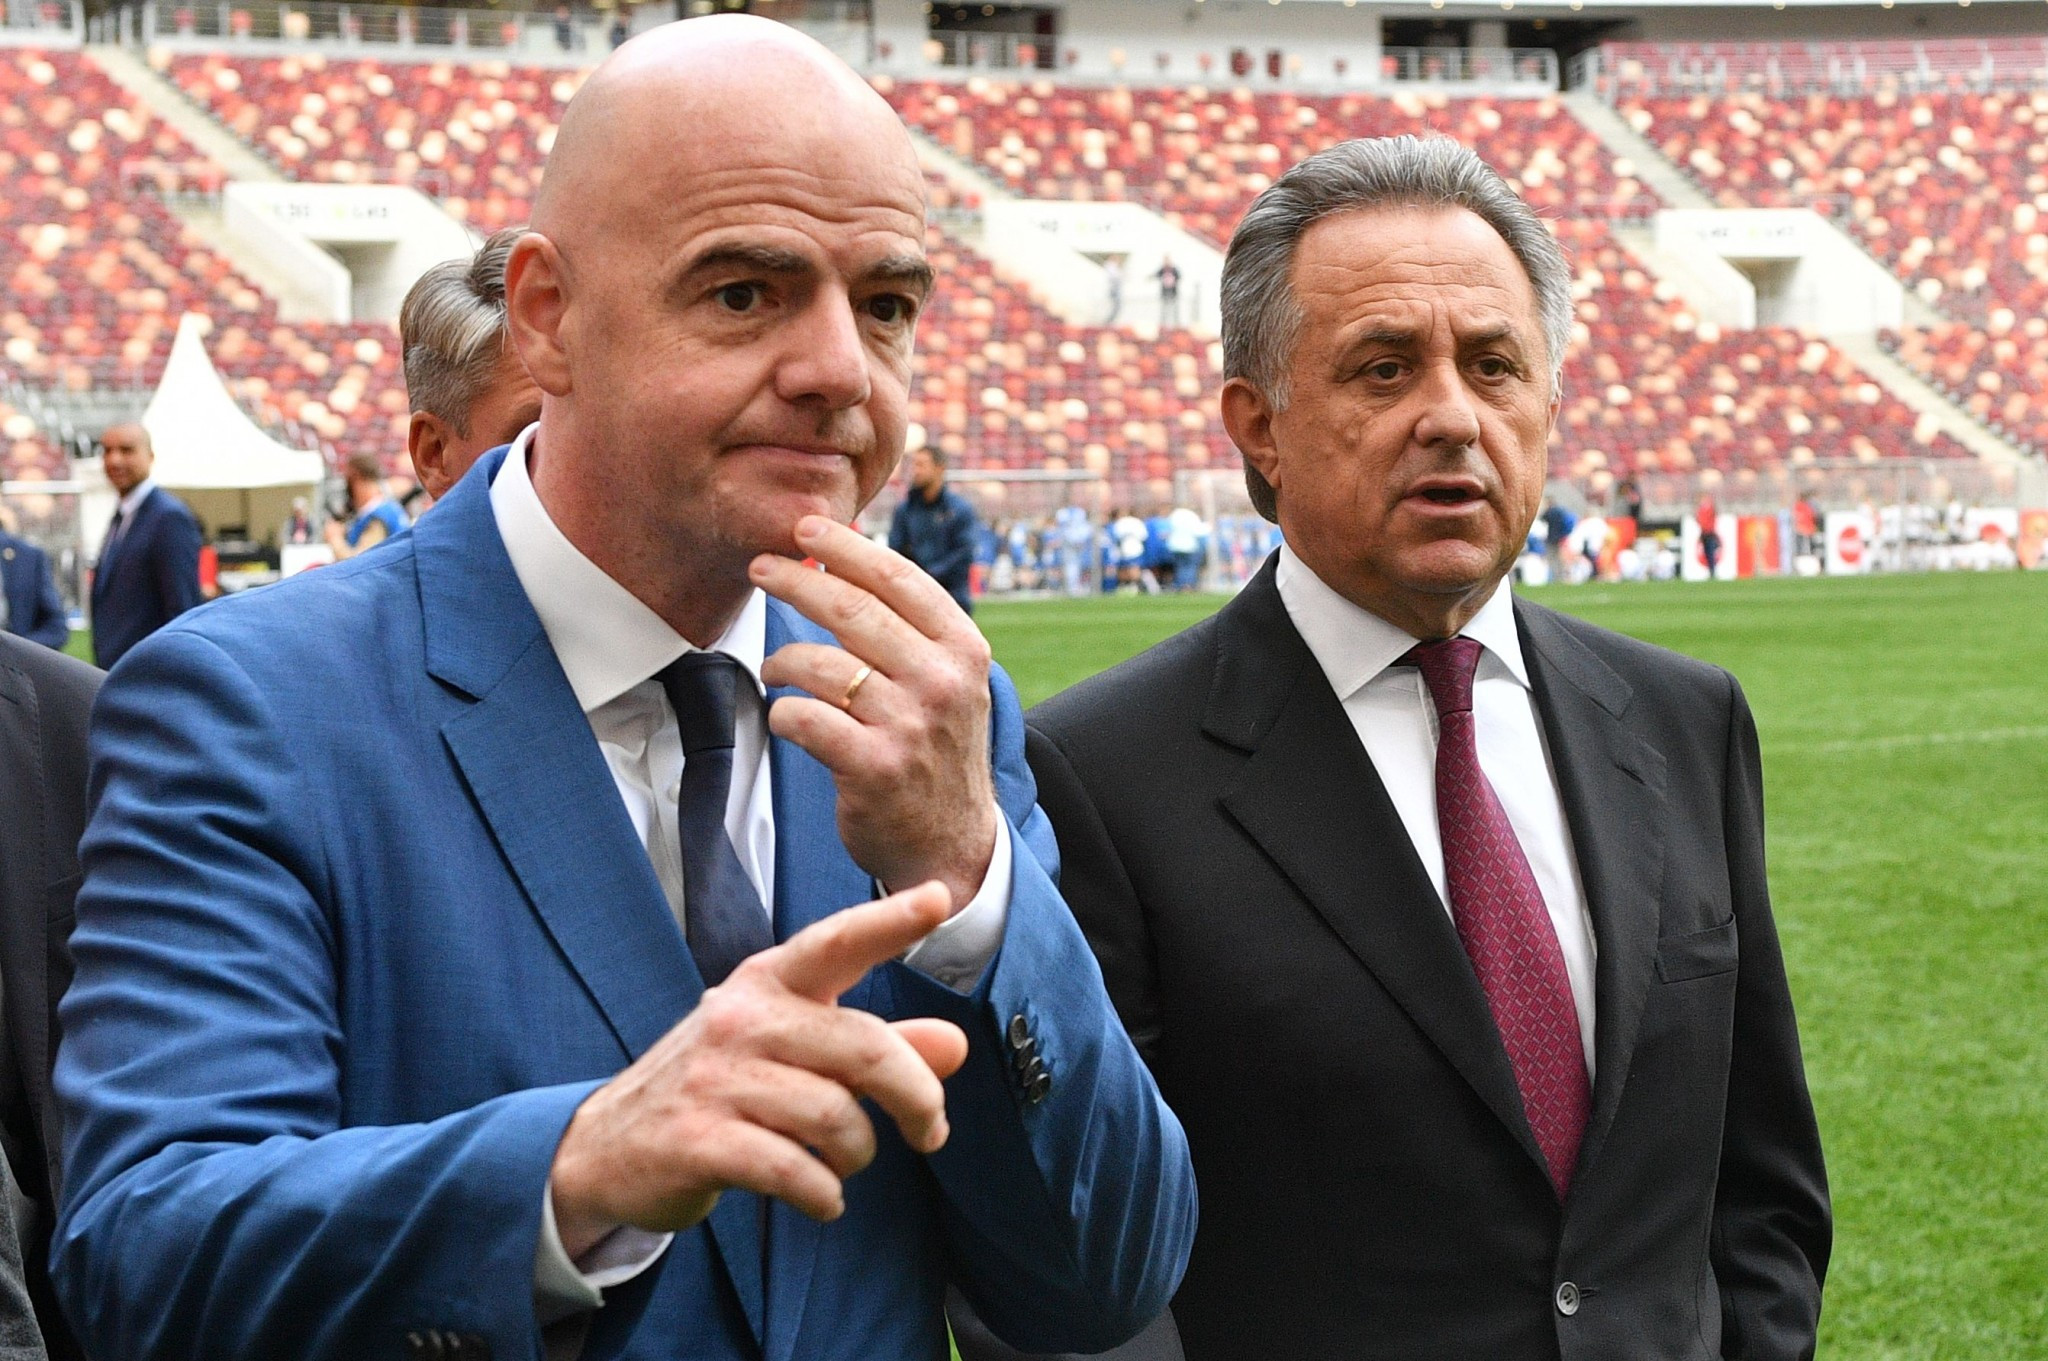 It has been alleged FIFA President Gianni Infantino, left, attempted to influence the decision to block Vitaly Mutko, right, from the organisation's Council ©Getty Images